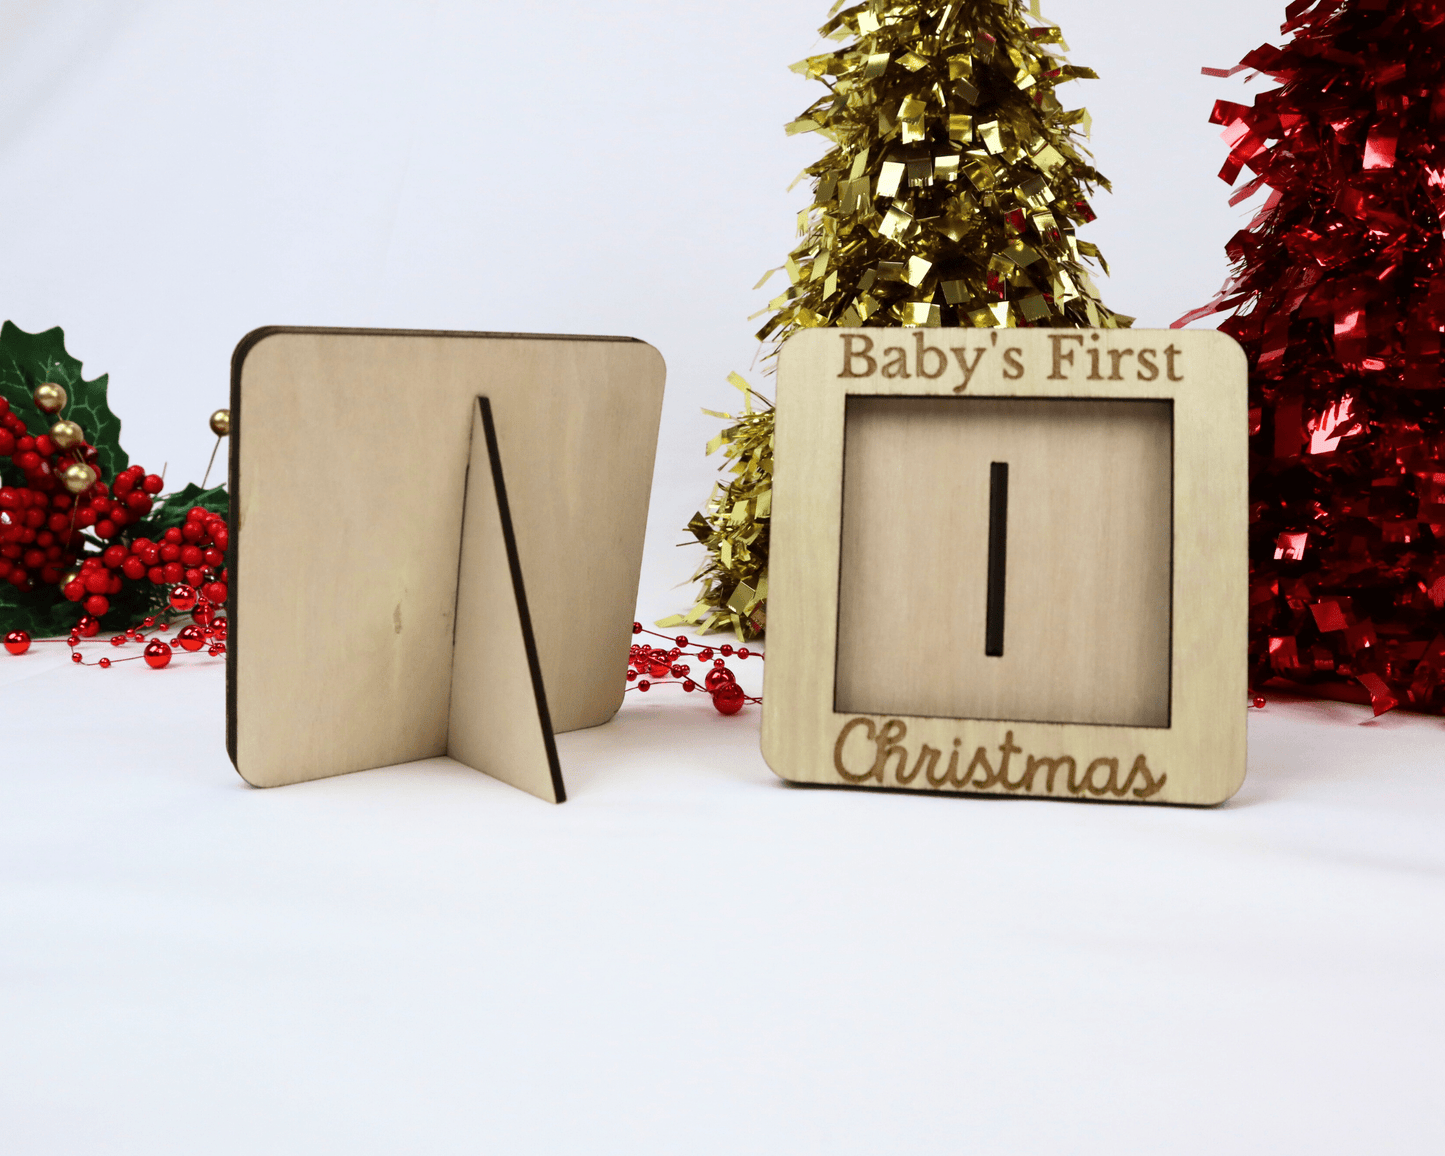 Baby's First Christmas Photo Frame